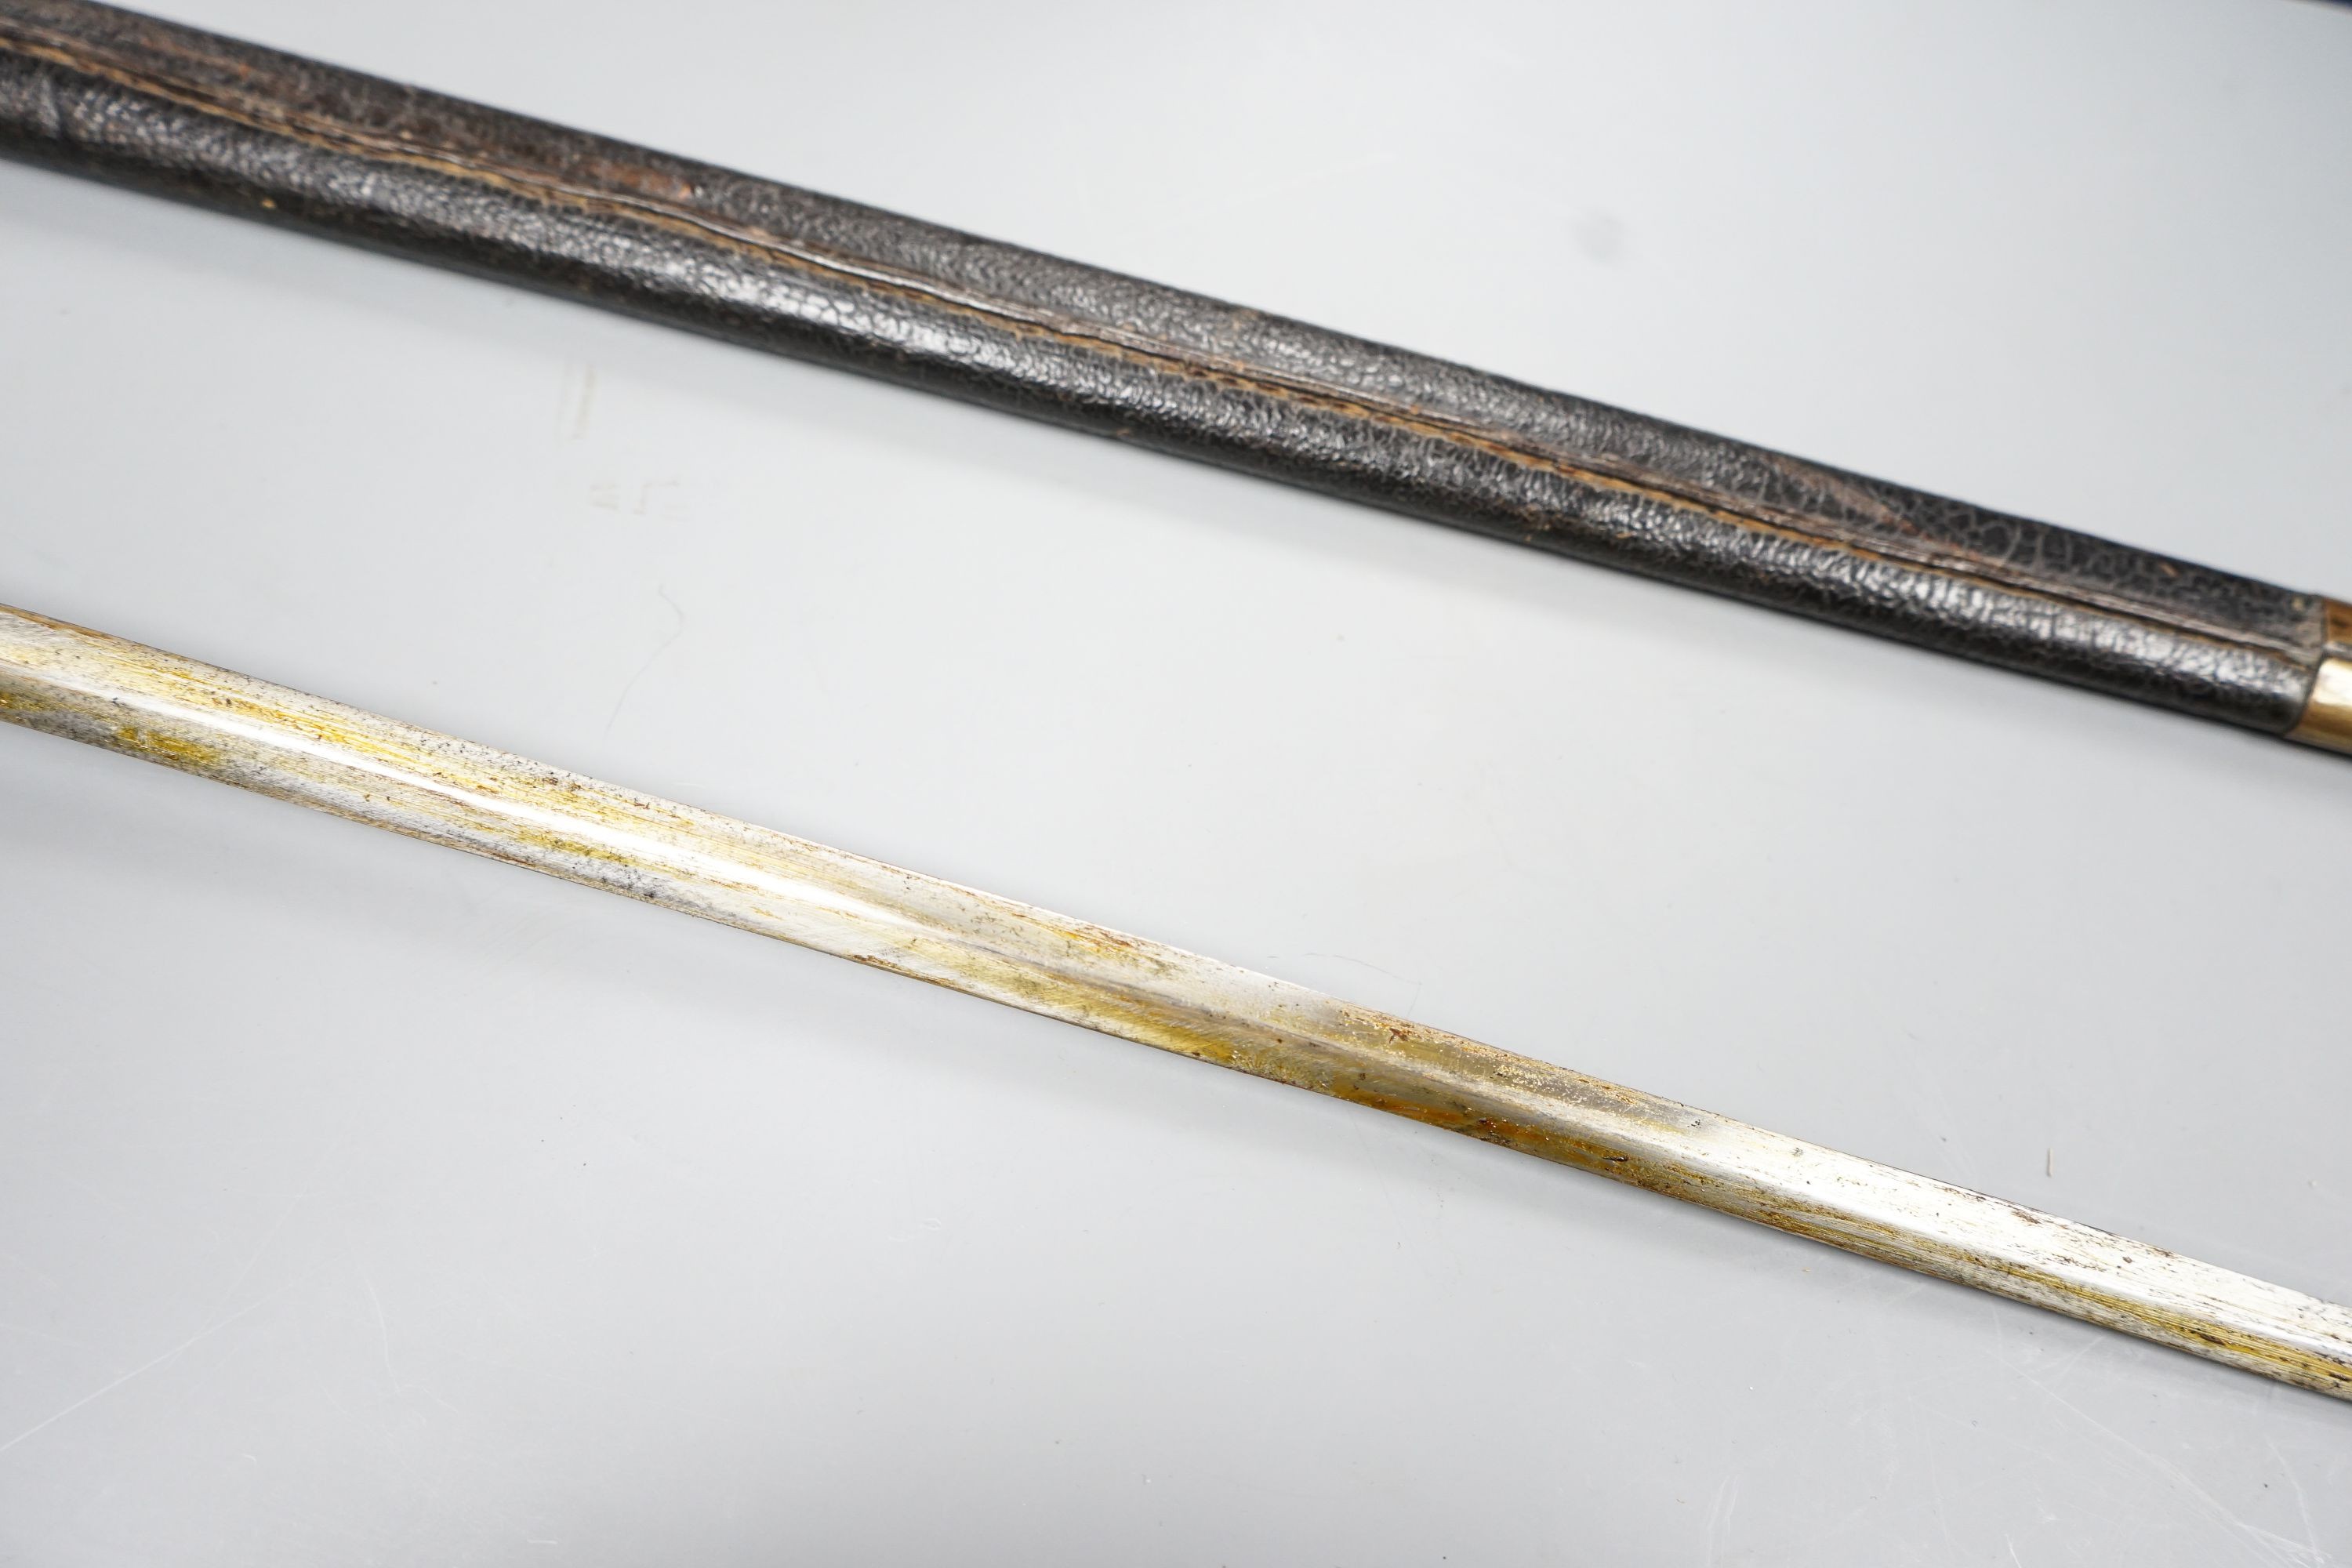 An early 19th century Prussian officer's sword, length 88cm